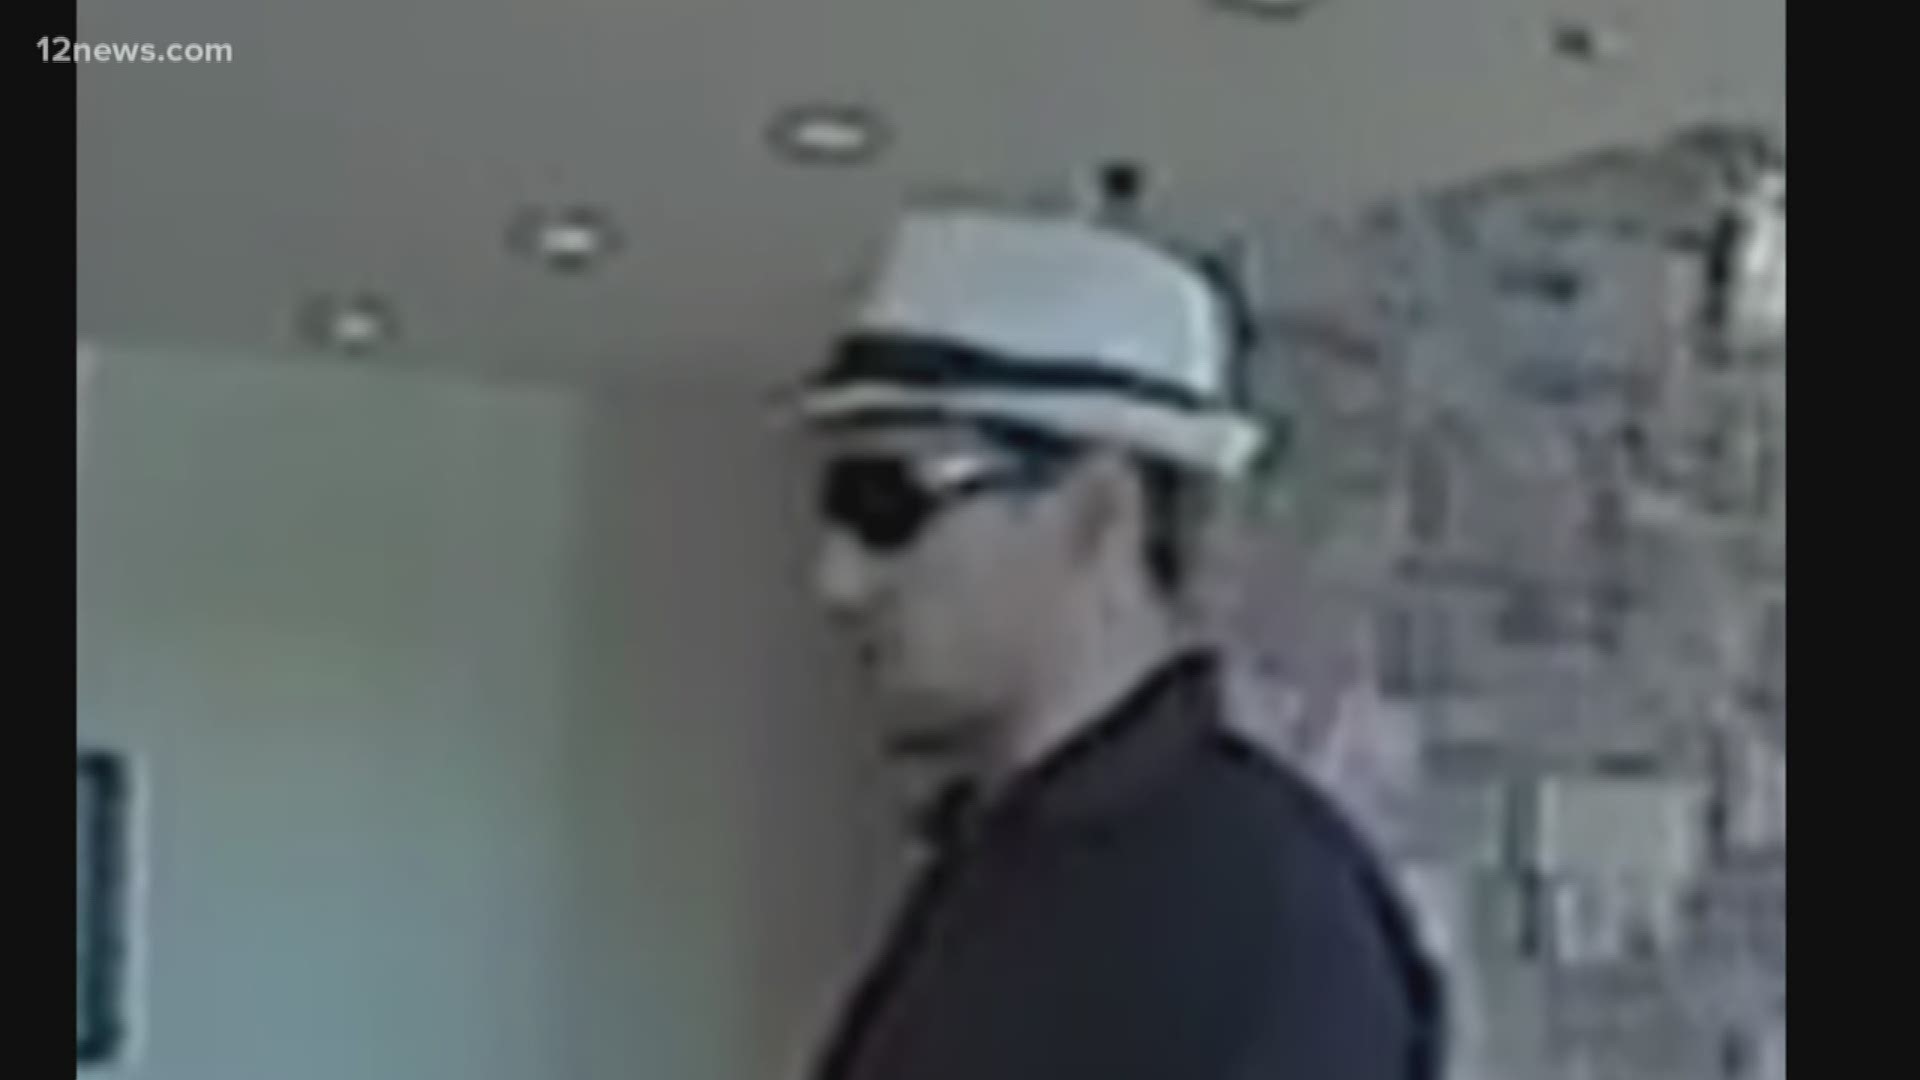 A person robbing several MidFirst Banks is on the loose. The suspect has been seen wearing a white fedora, black sunglasses, a long-sleeved dress shirt and blue jeans. There is a $5000 reward.